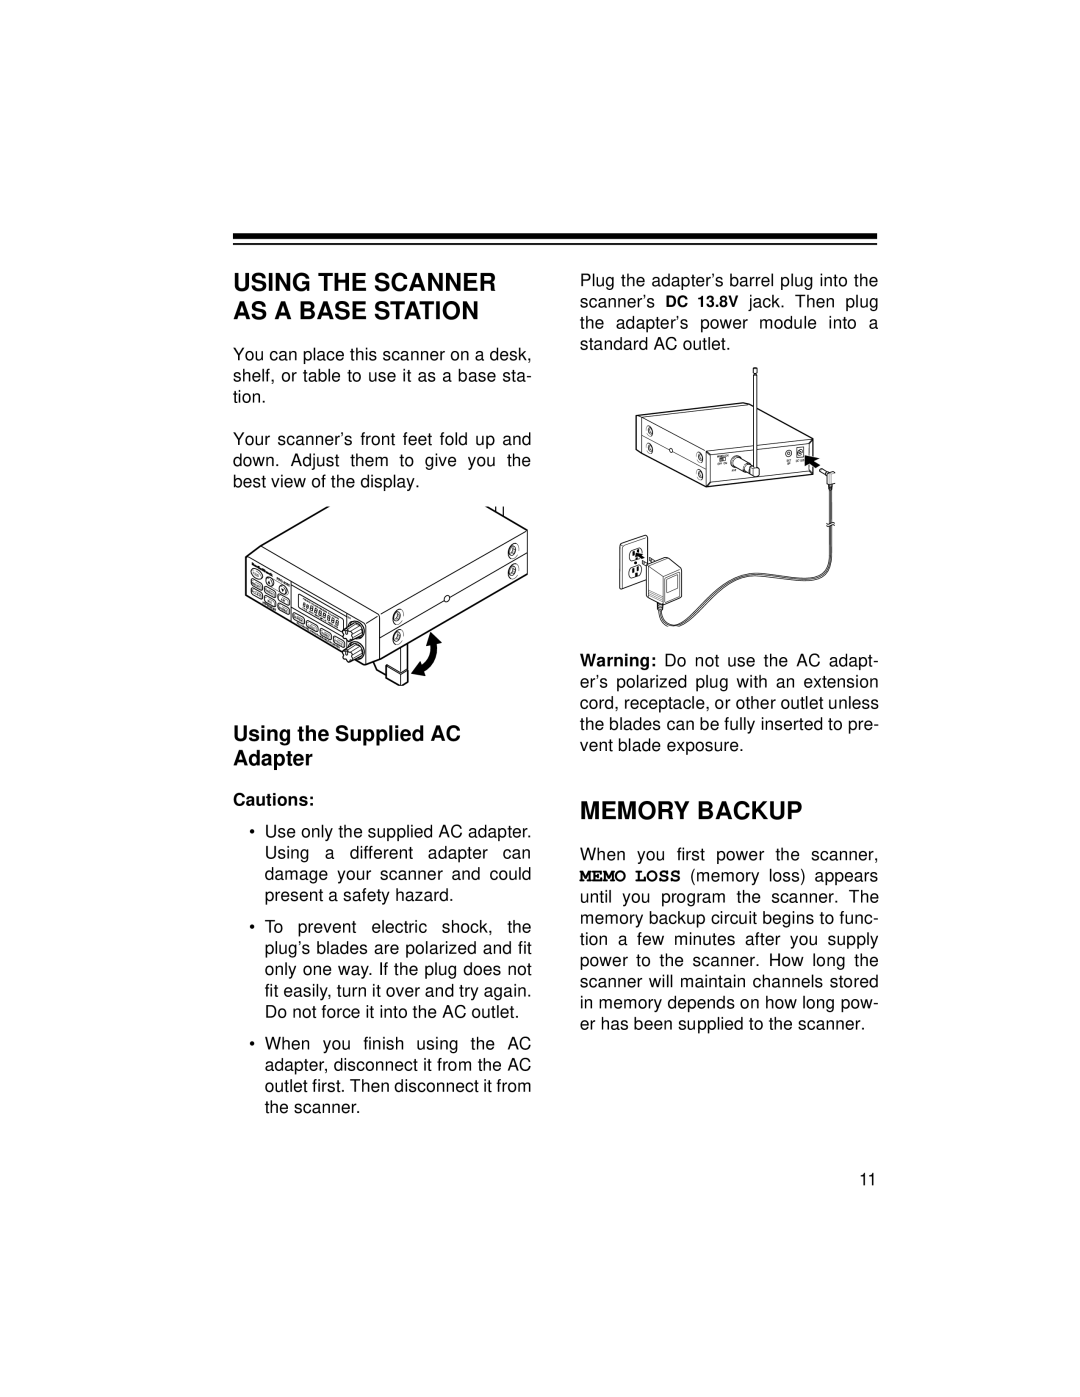 Radio Shack PRO-2056 owner manual Using The Scanner As A Base Station, Memory Backup, Using the Supplied AC Adapter 